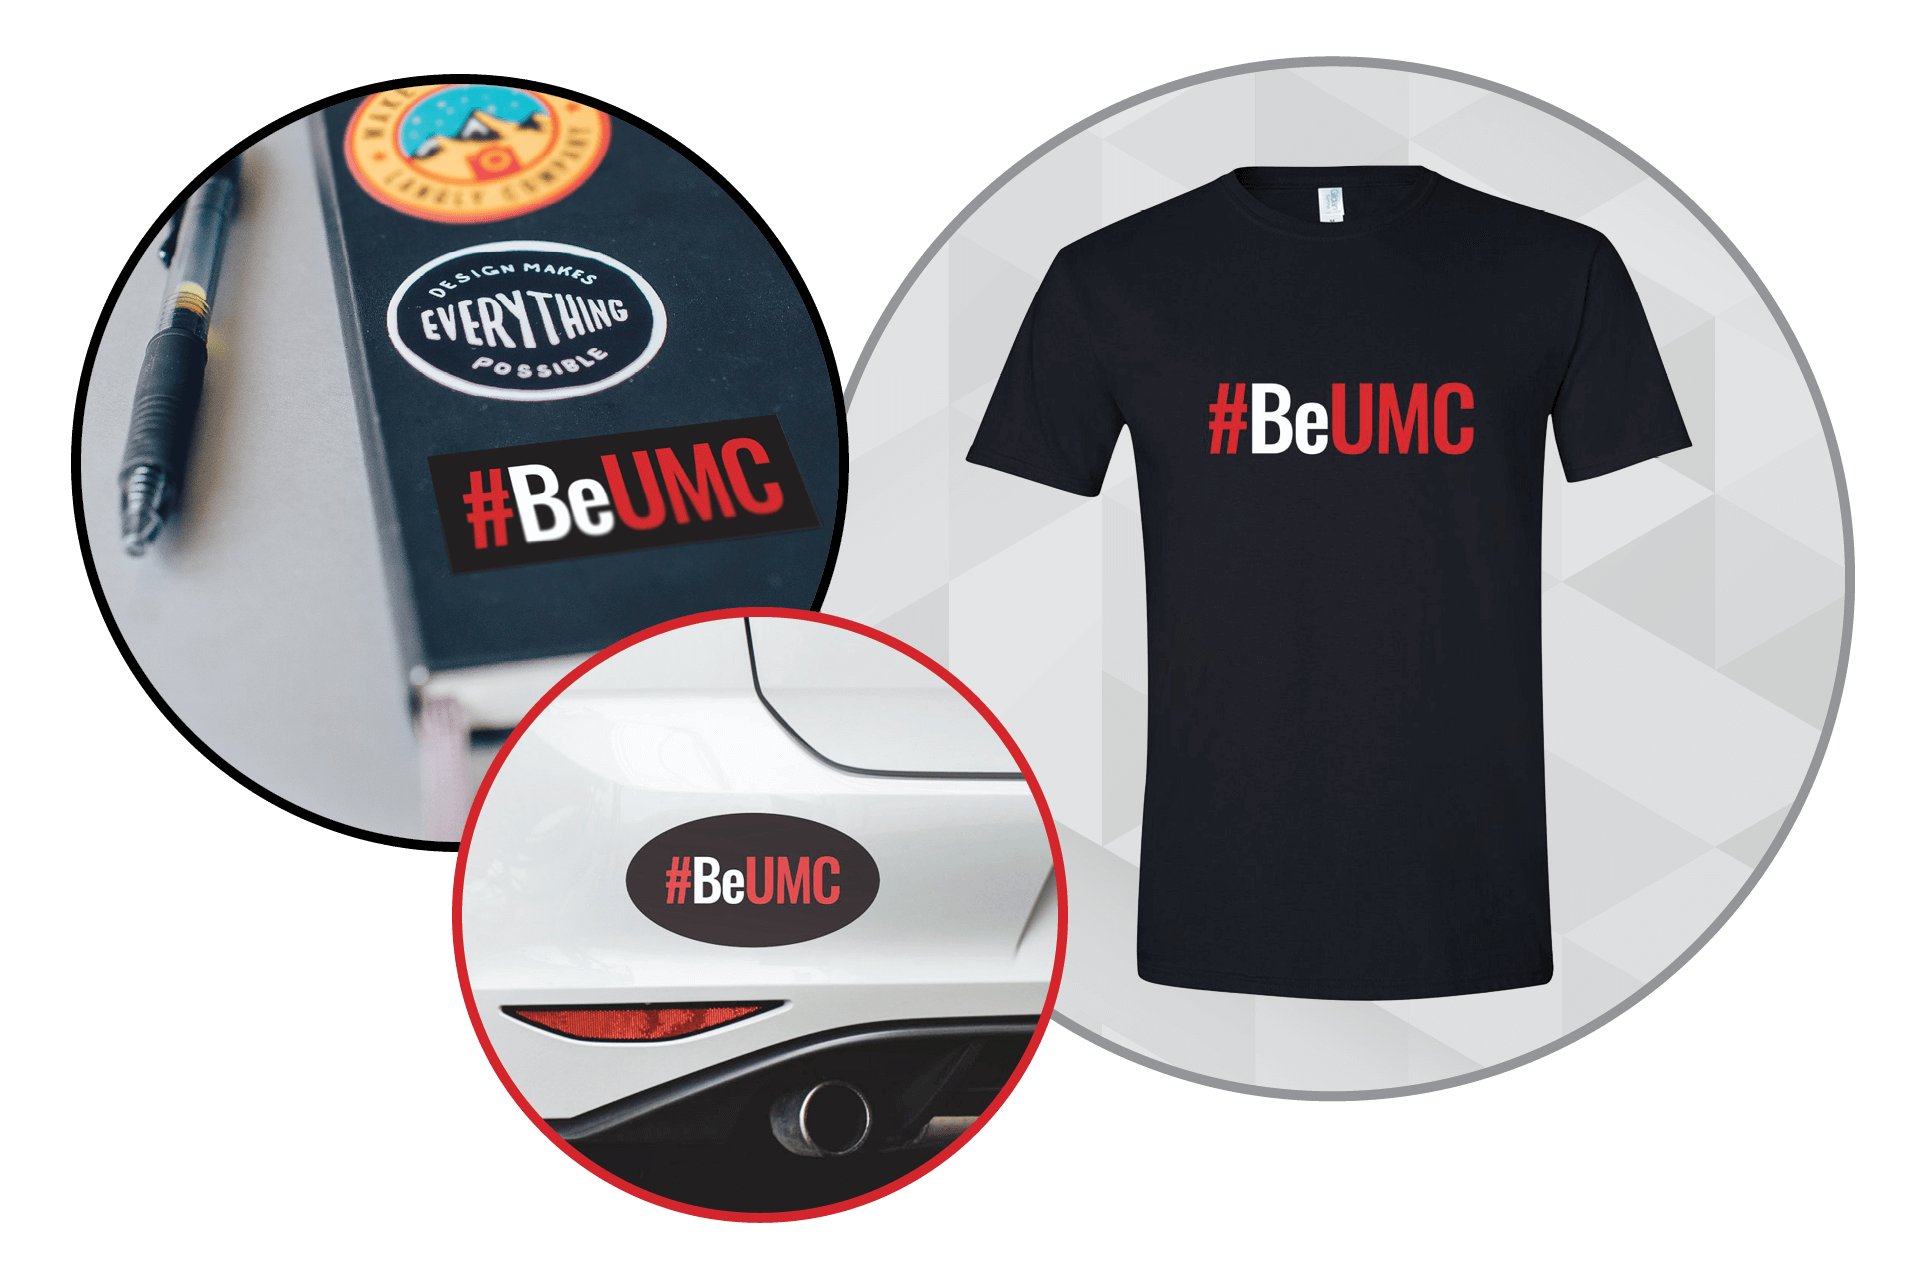 Show your commitment to #BeUMC with these products (T-shirt, sticker or magnet).